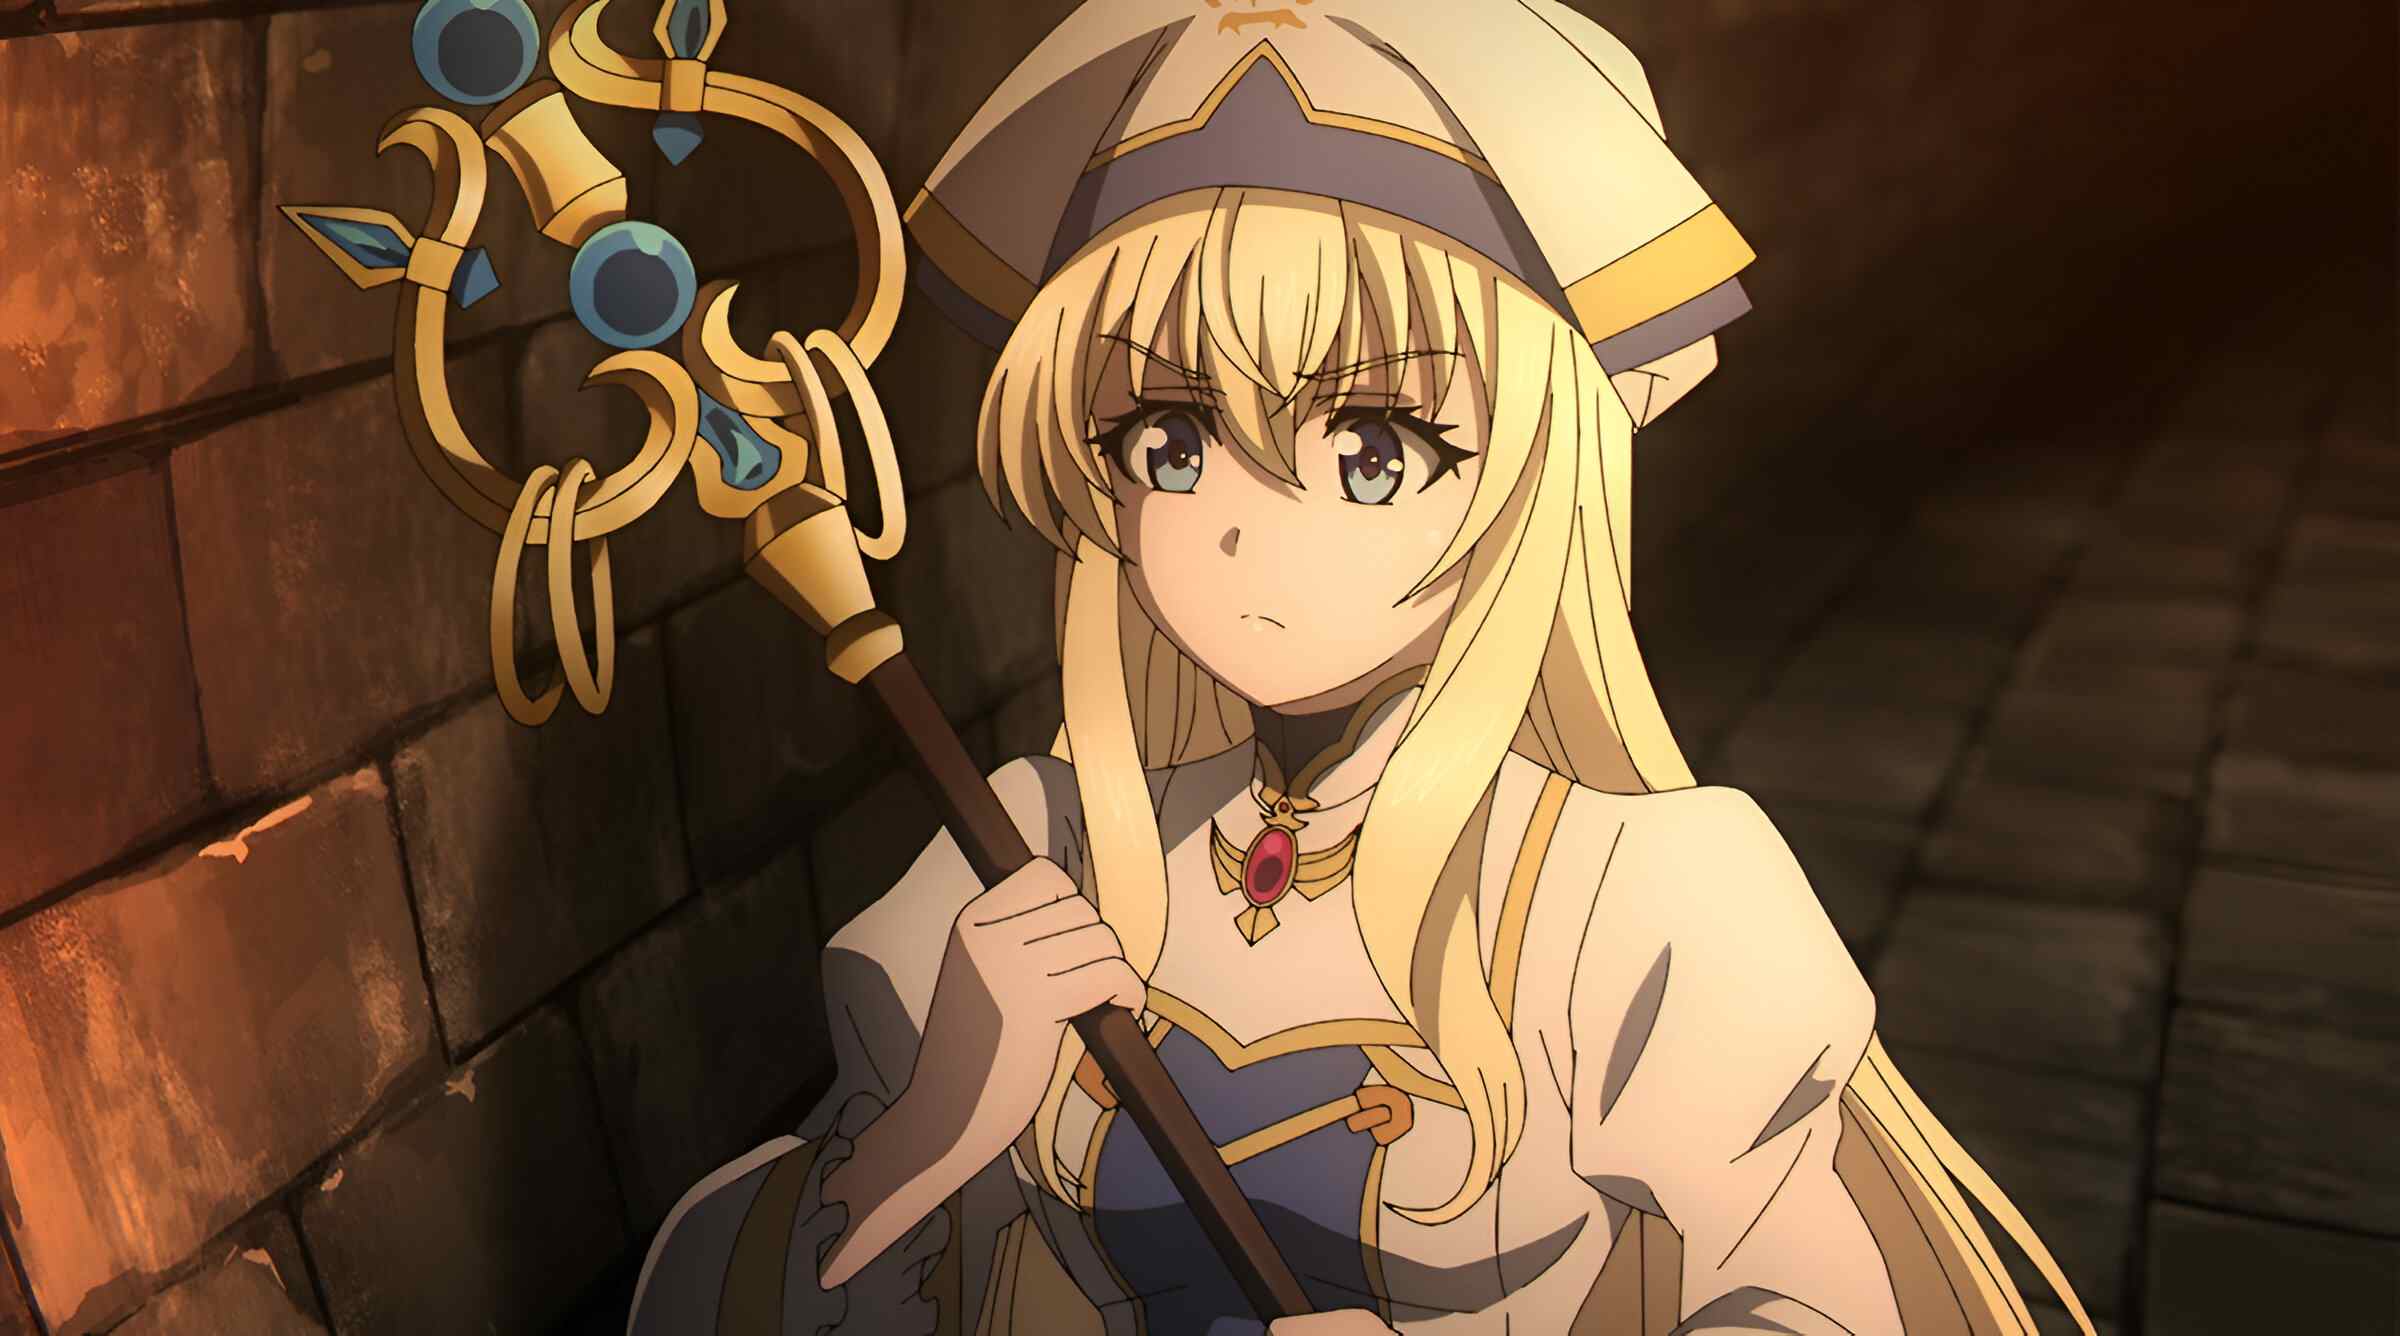 Goblin Slayer Season 2 Episode 7 Release Date & Time, Preview Images, and Spoilers